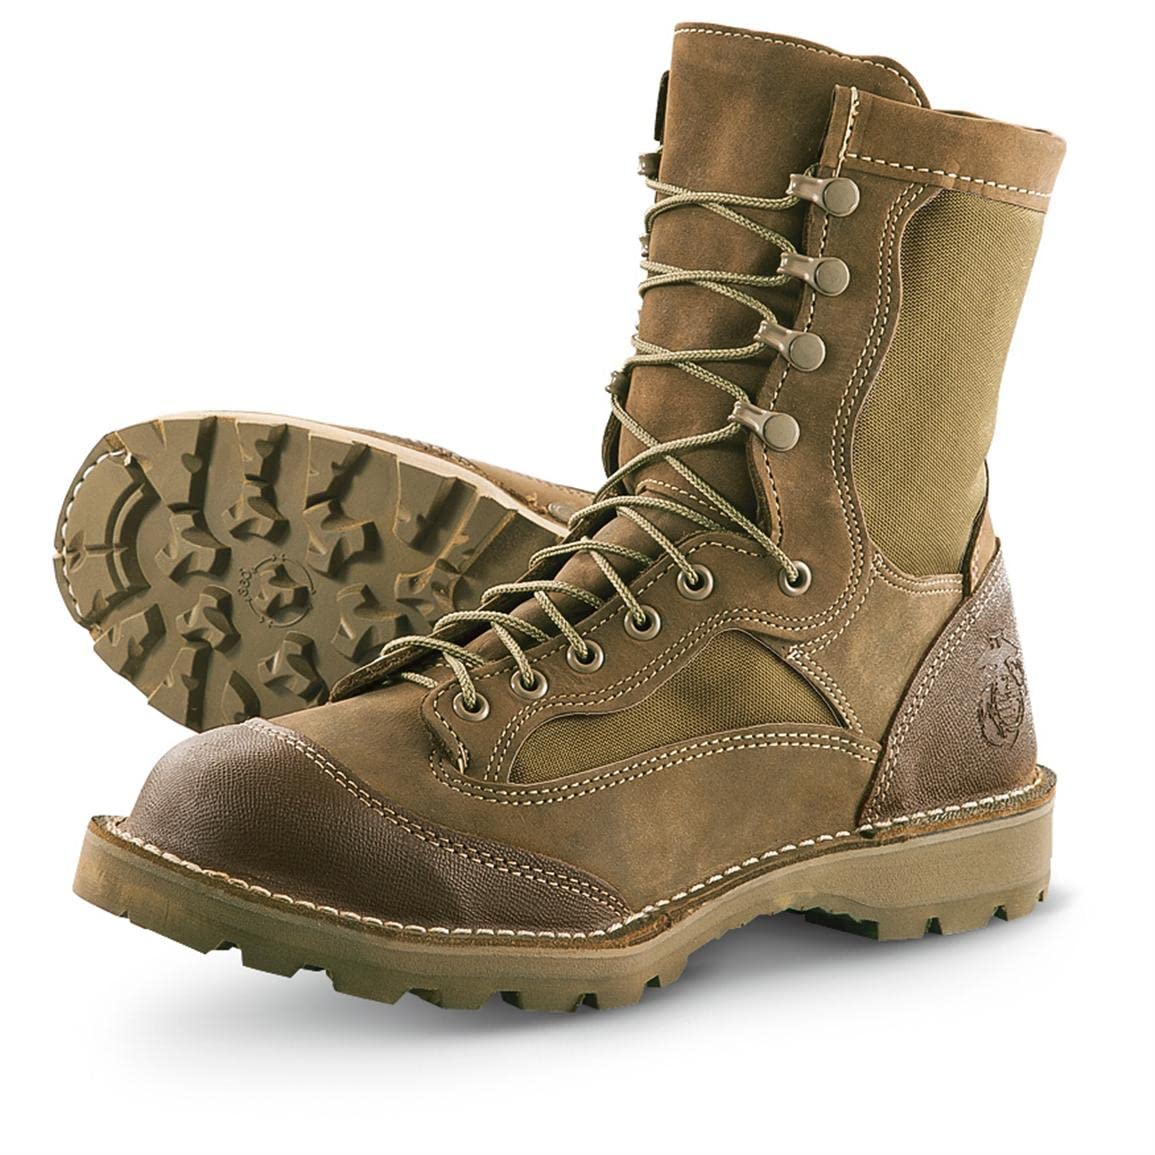 USMC Speed Lacer RAT Boot, Waterproof Gore-TEX, Vibram 360, GI, Made in USA, Mojave, Brown